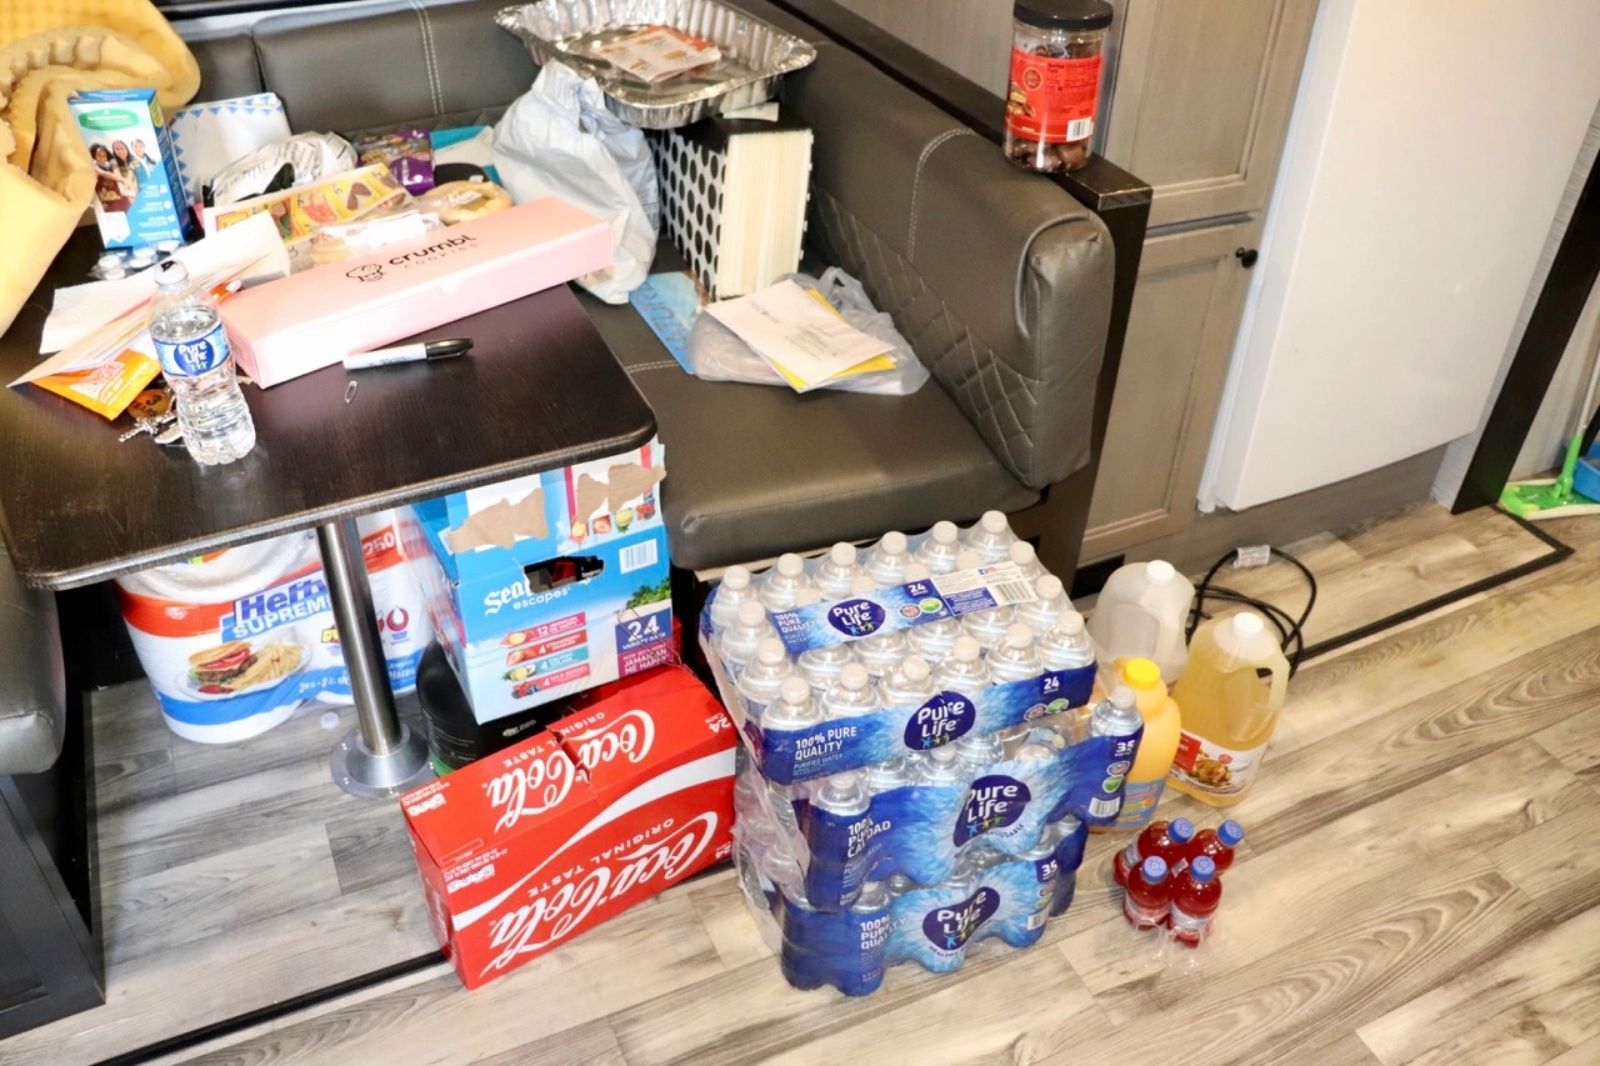 Stacks of bottled water and Coke sit on the floor of a room.